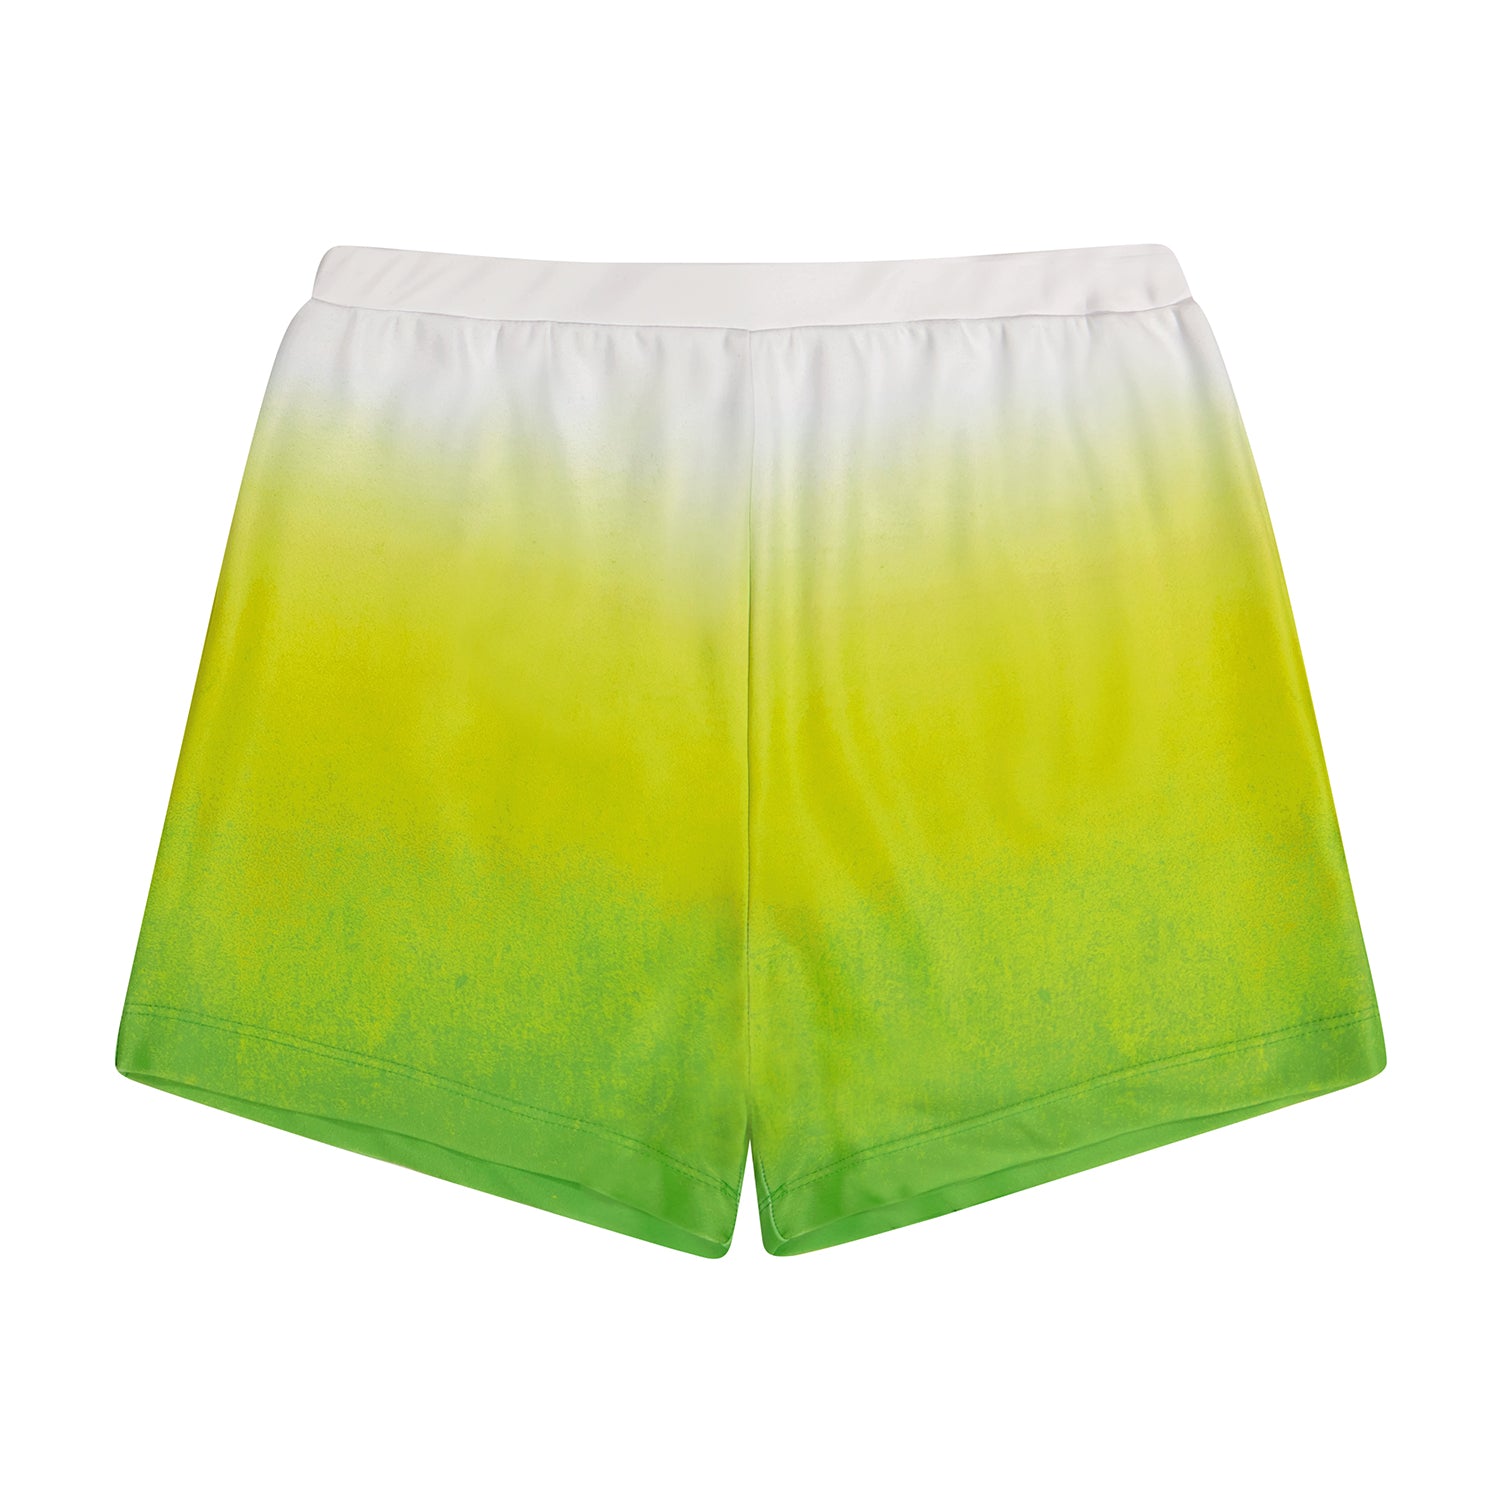 Sparrow Kids Swimming Shorts - Ombre